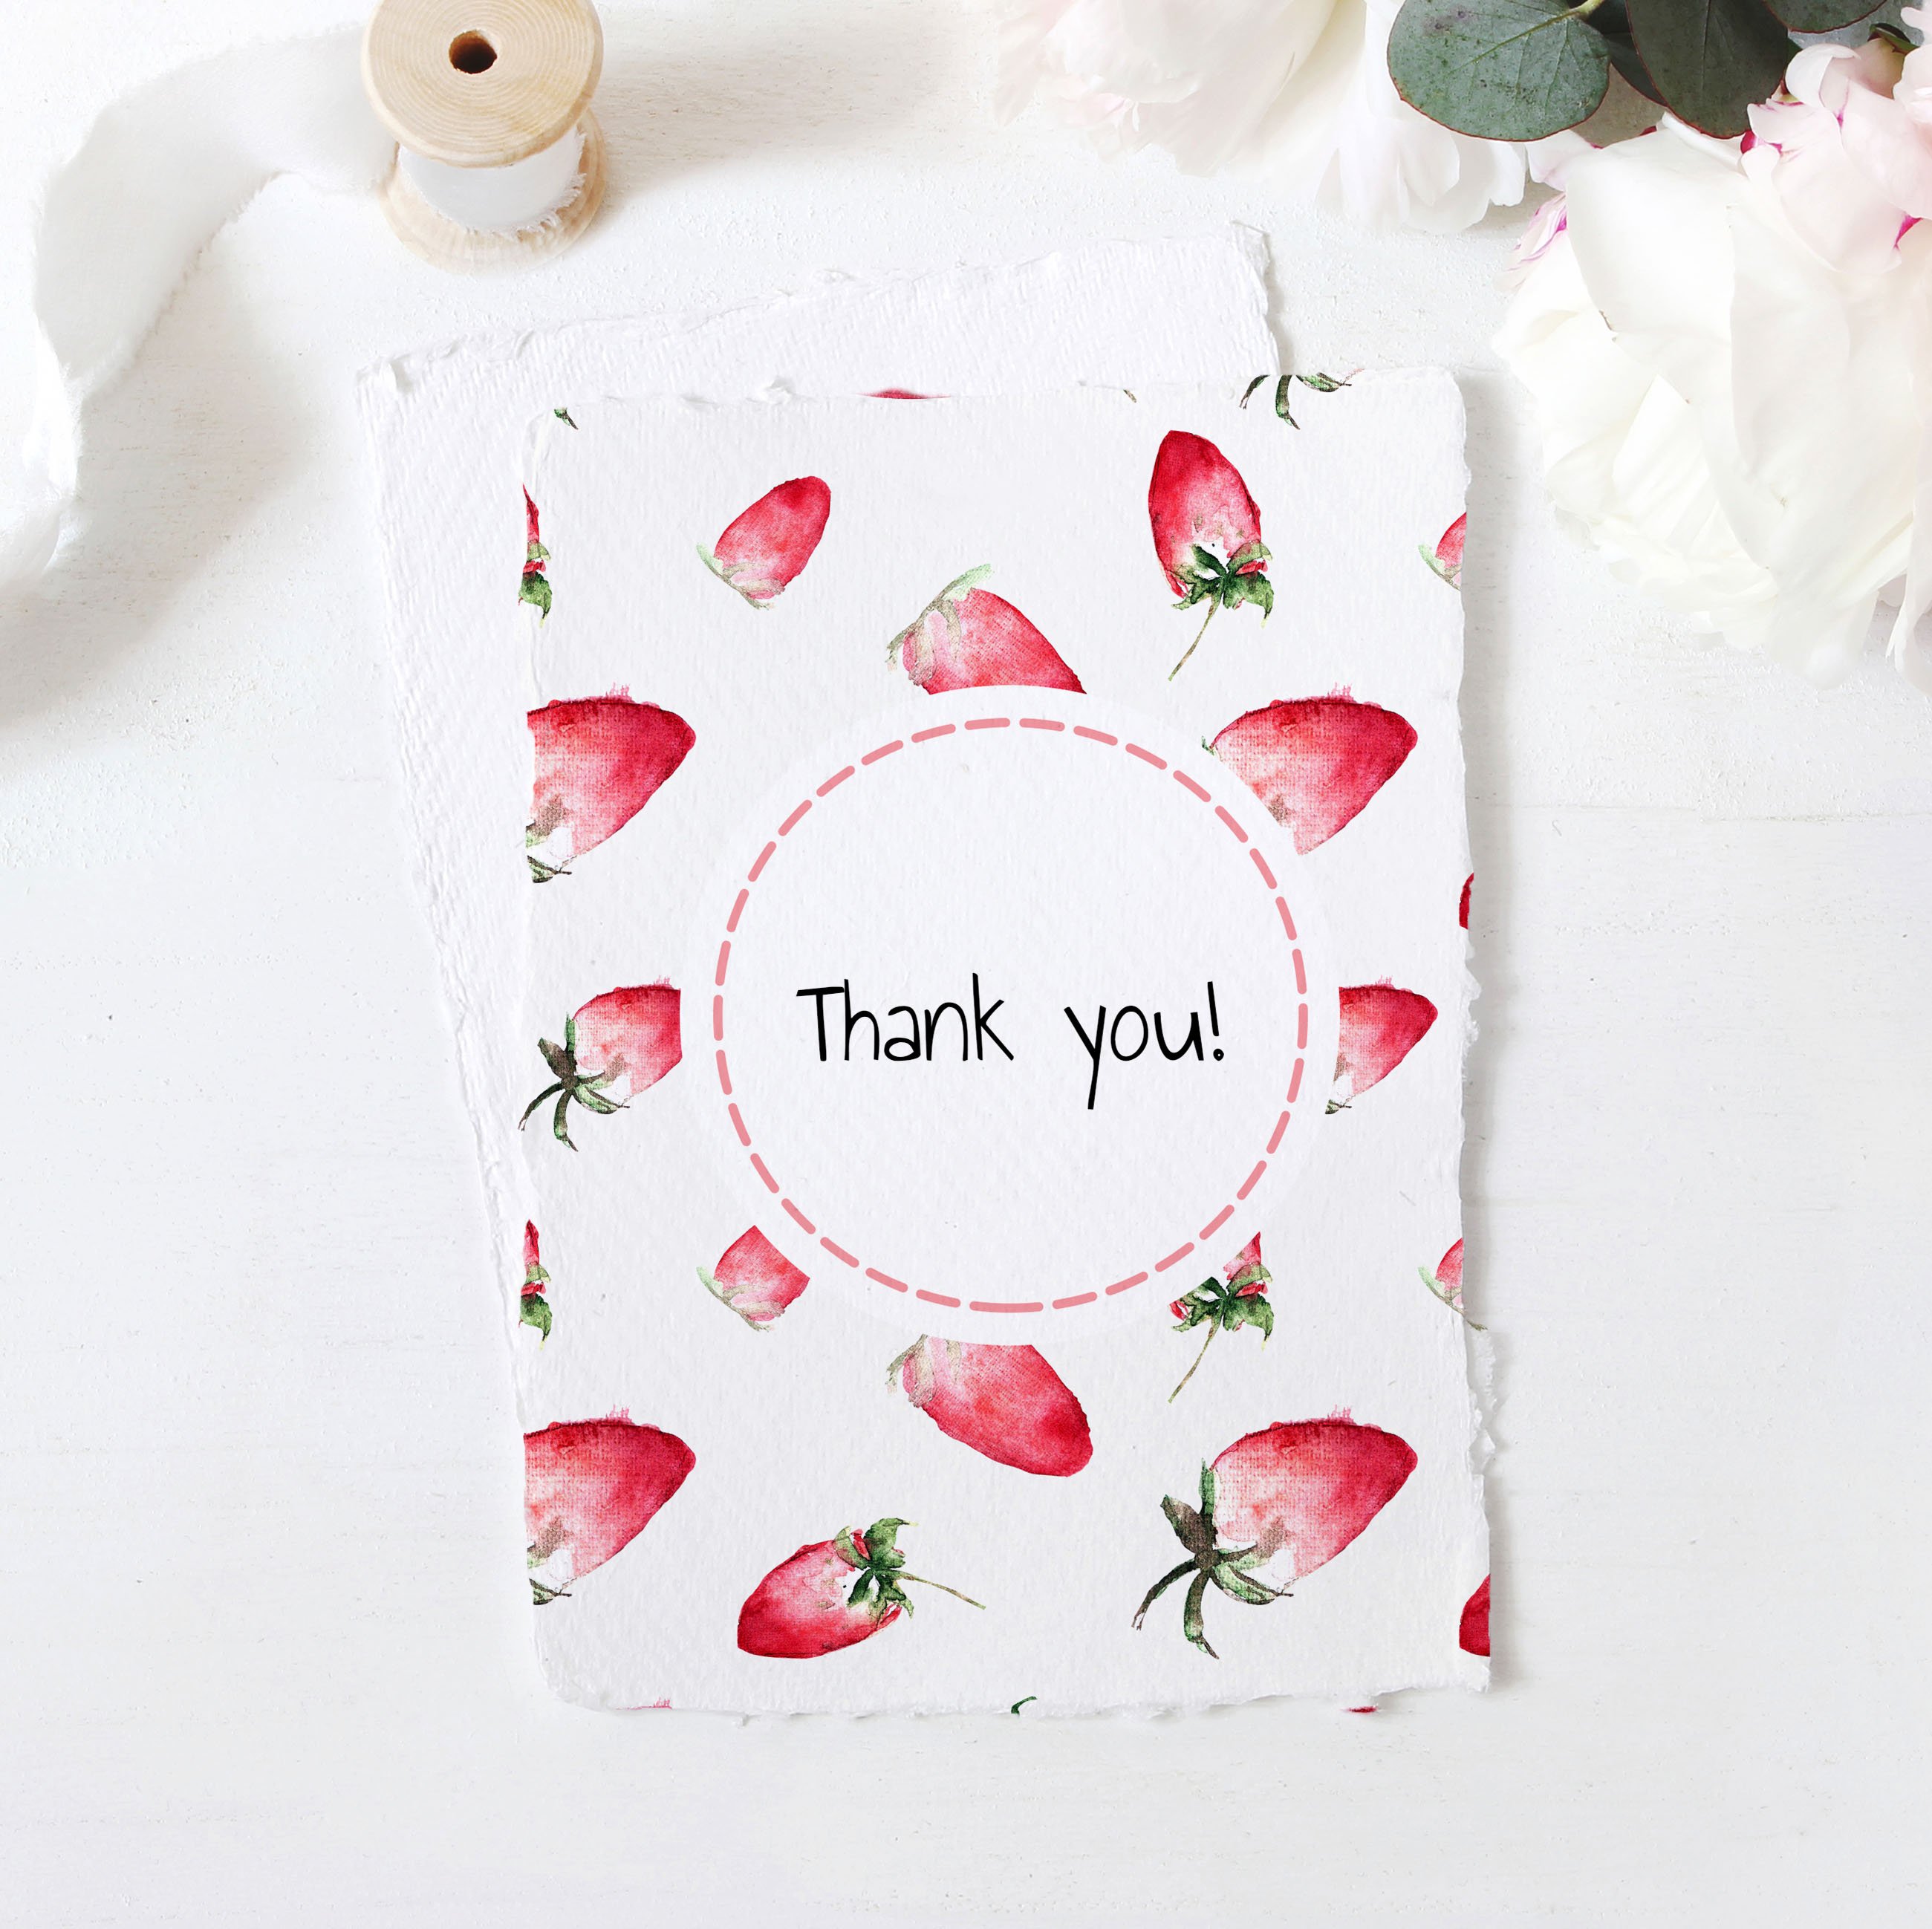 White card with black lettering "Thank you" and illustrations of a strawberry.